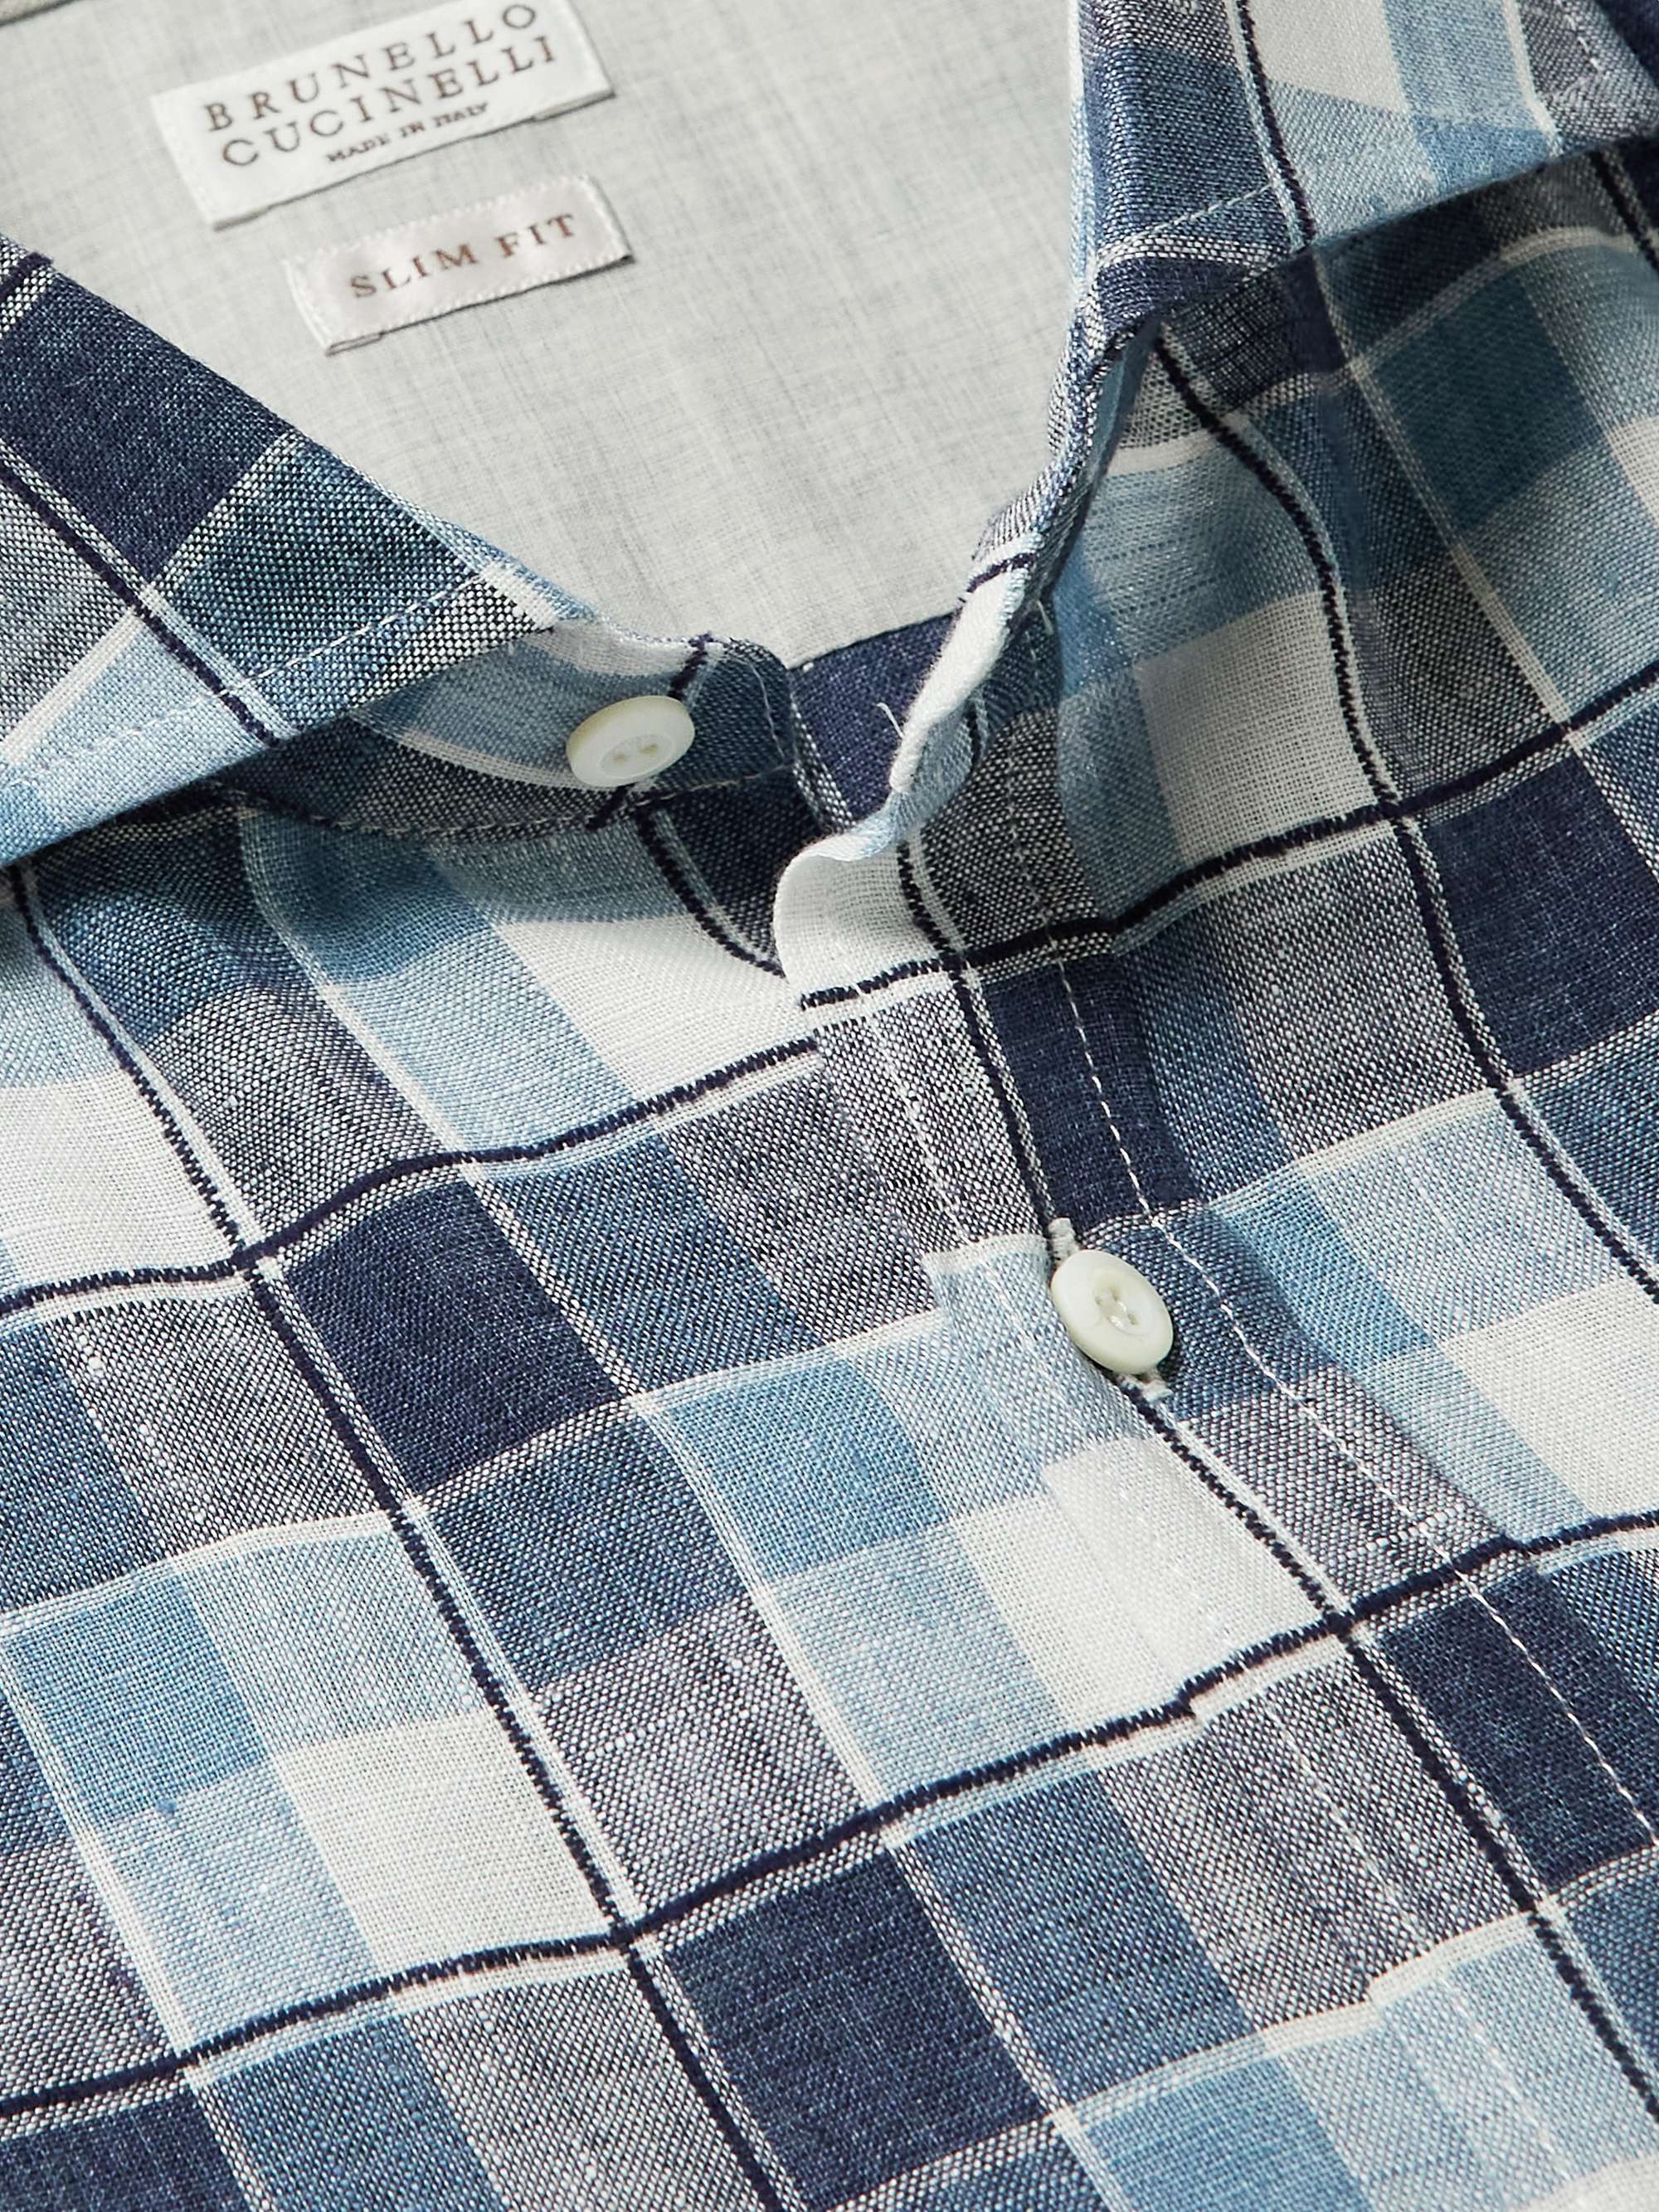 BRUNELLO CUCINELLI Slim-Fit Checked Linen and Cotton-Blend Shirt